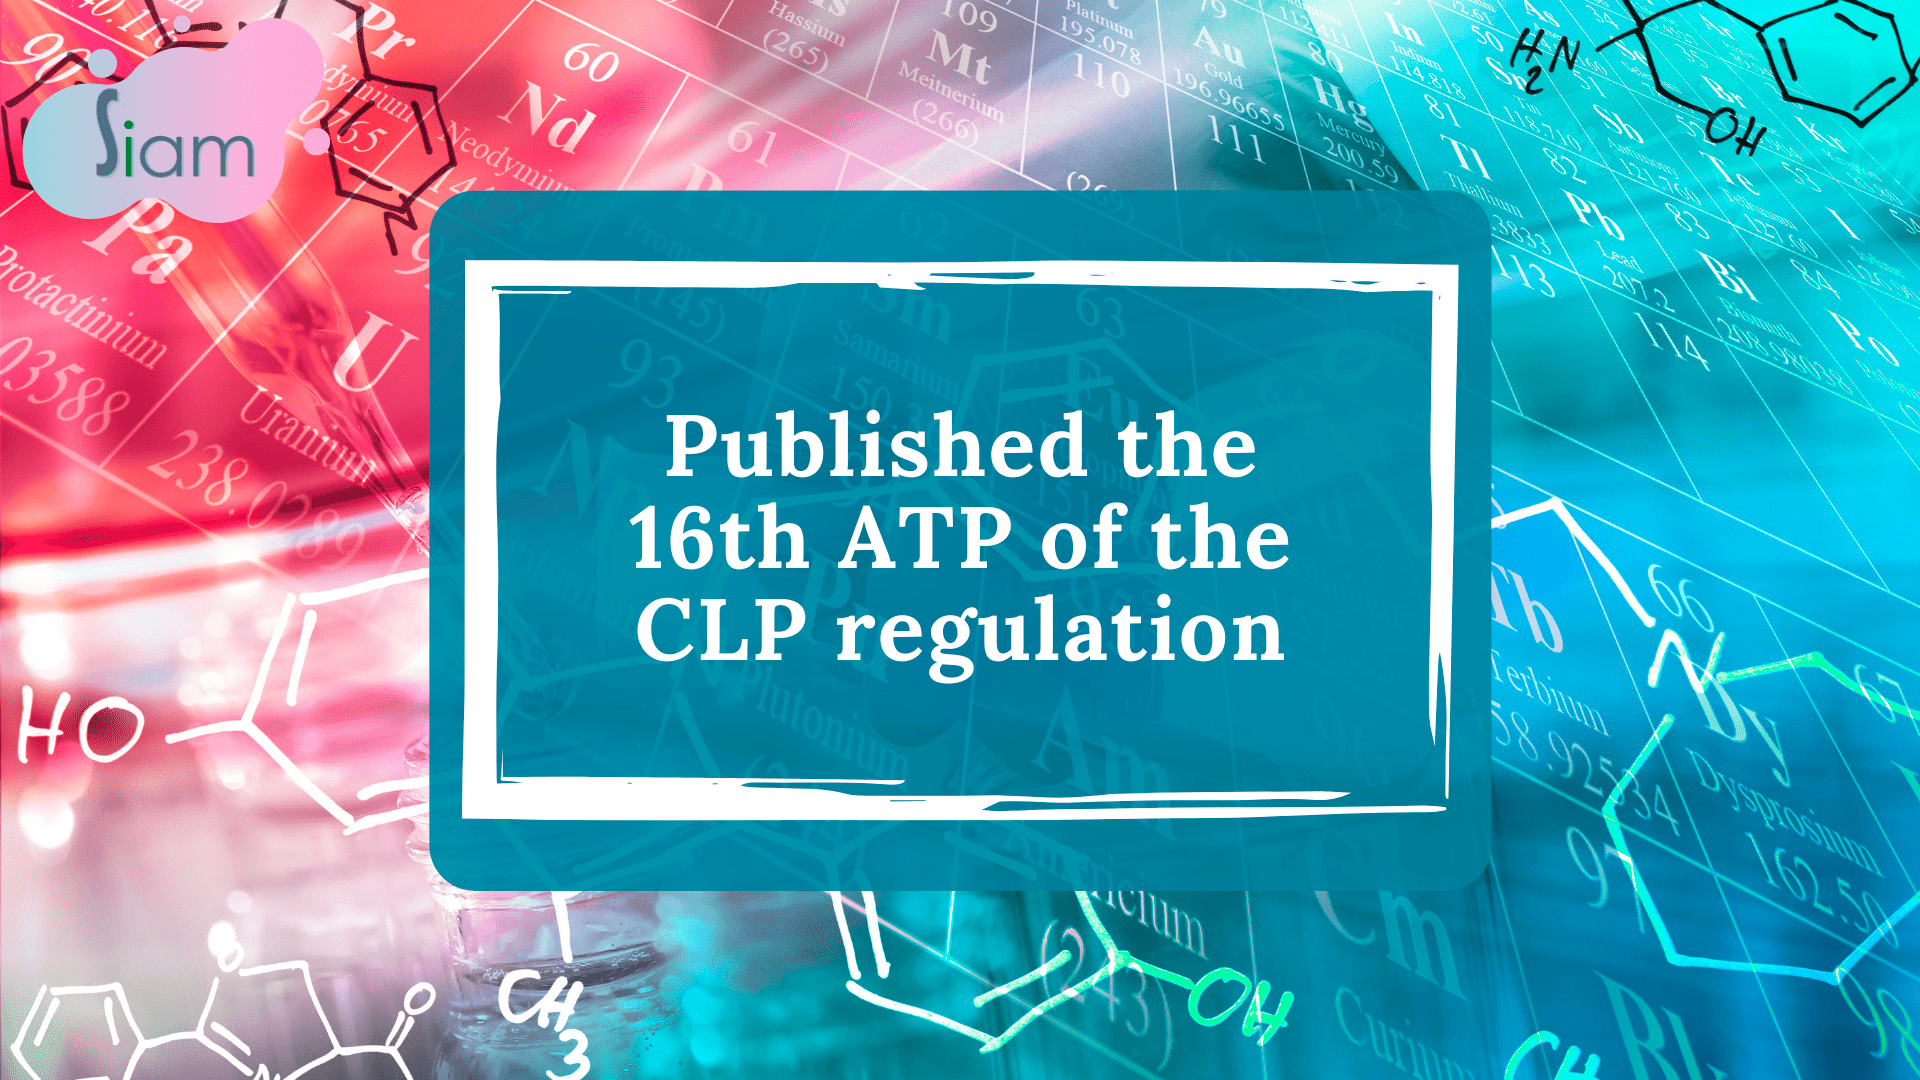 Published the 16th ATP of the CLP regulation